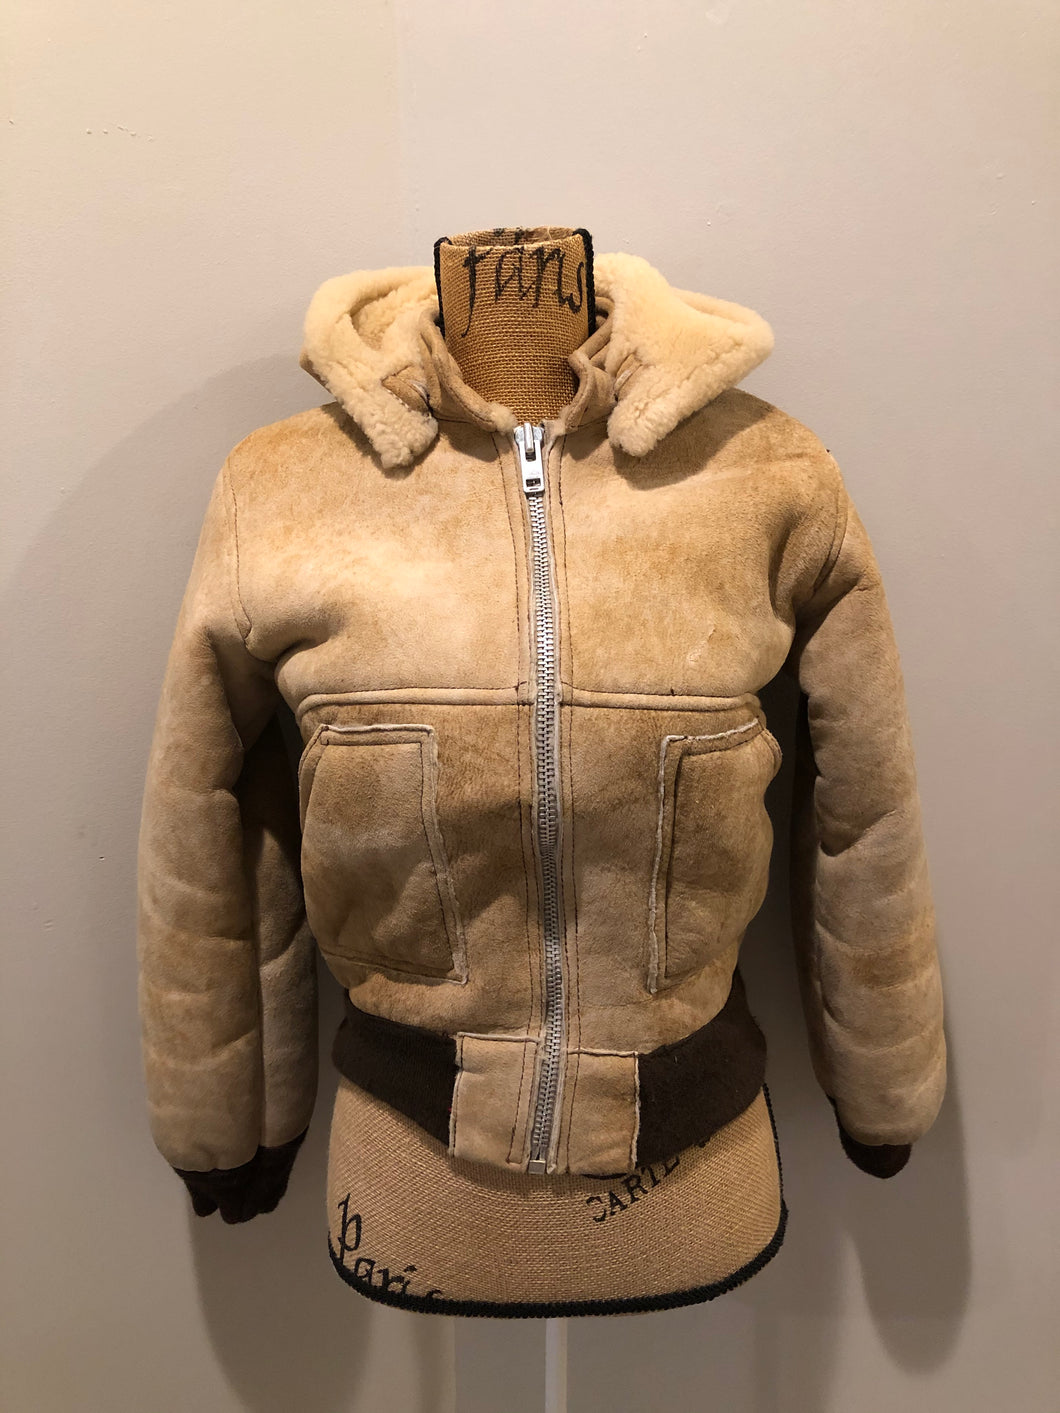 Kingspier Vintage - Ewe Wear, genuine sheepskin hooded bomber style jacket. This jacket features shearling lining, hood, zipper closure and slash pockets. Made in Kingston, Nova Scotia. Size XS.